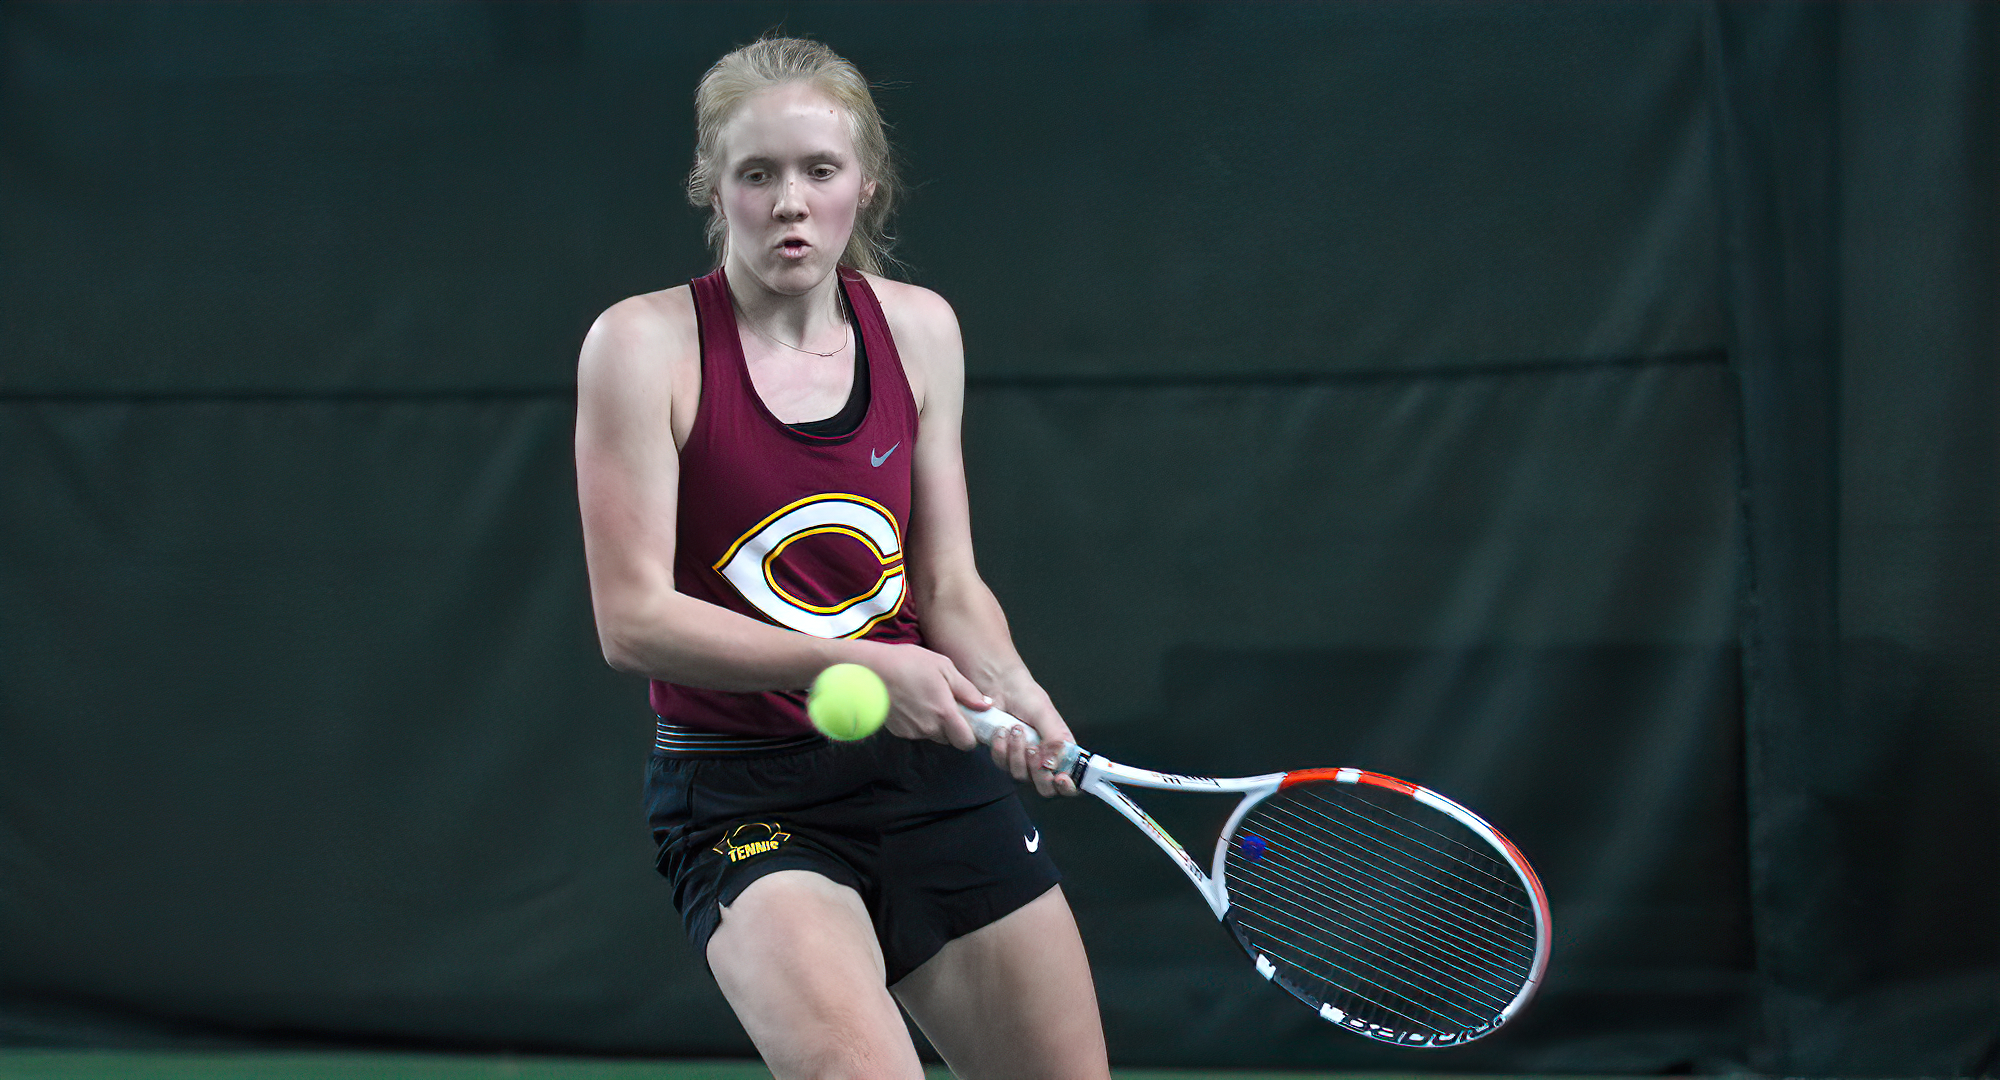 Freshman Erin Borchard tracks down a volley and hits a backhand winner during the first set of her 7-5, 6-1 win at No.6 singles vs. MSUM.